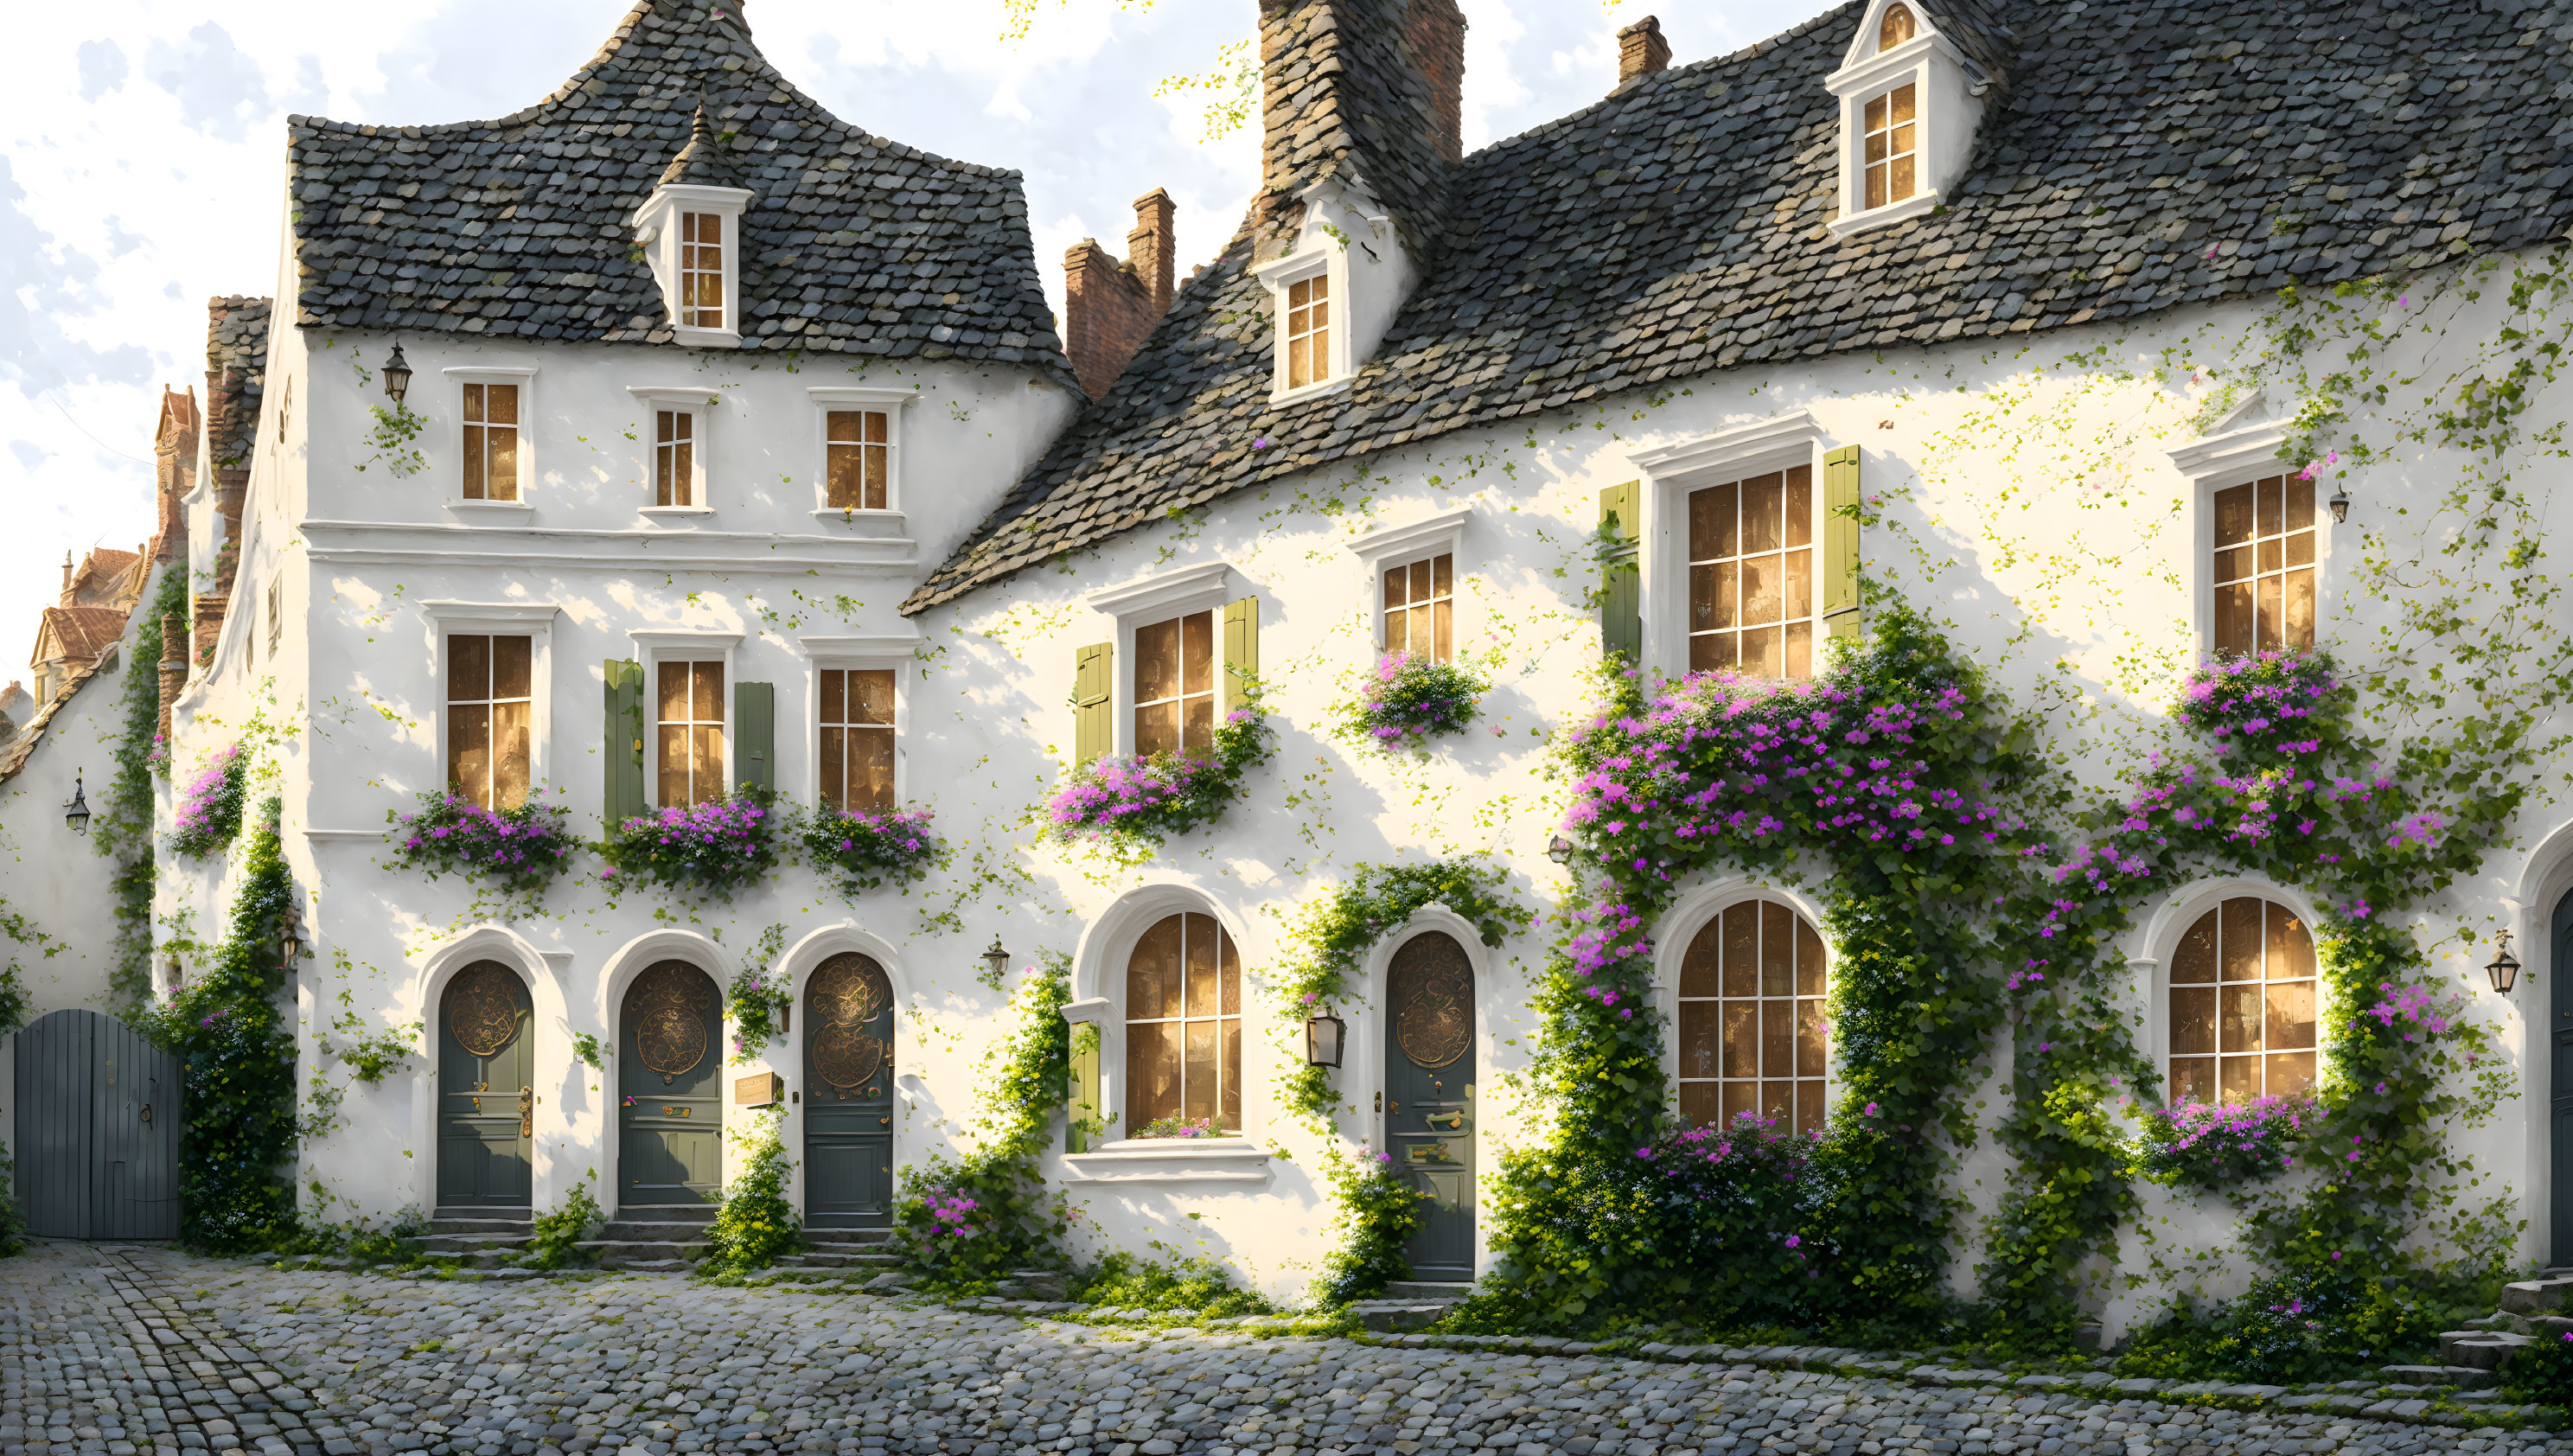 European-style Stone Houses with Ivy and Flowering Vines on Cobblestone Street